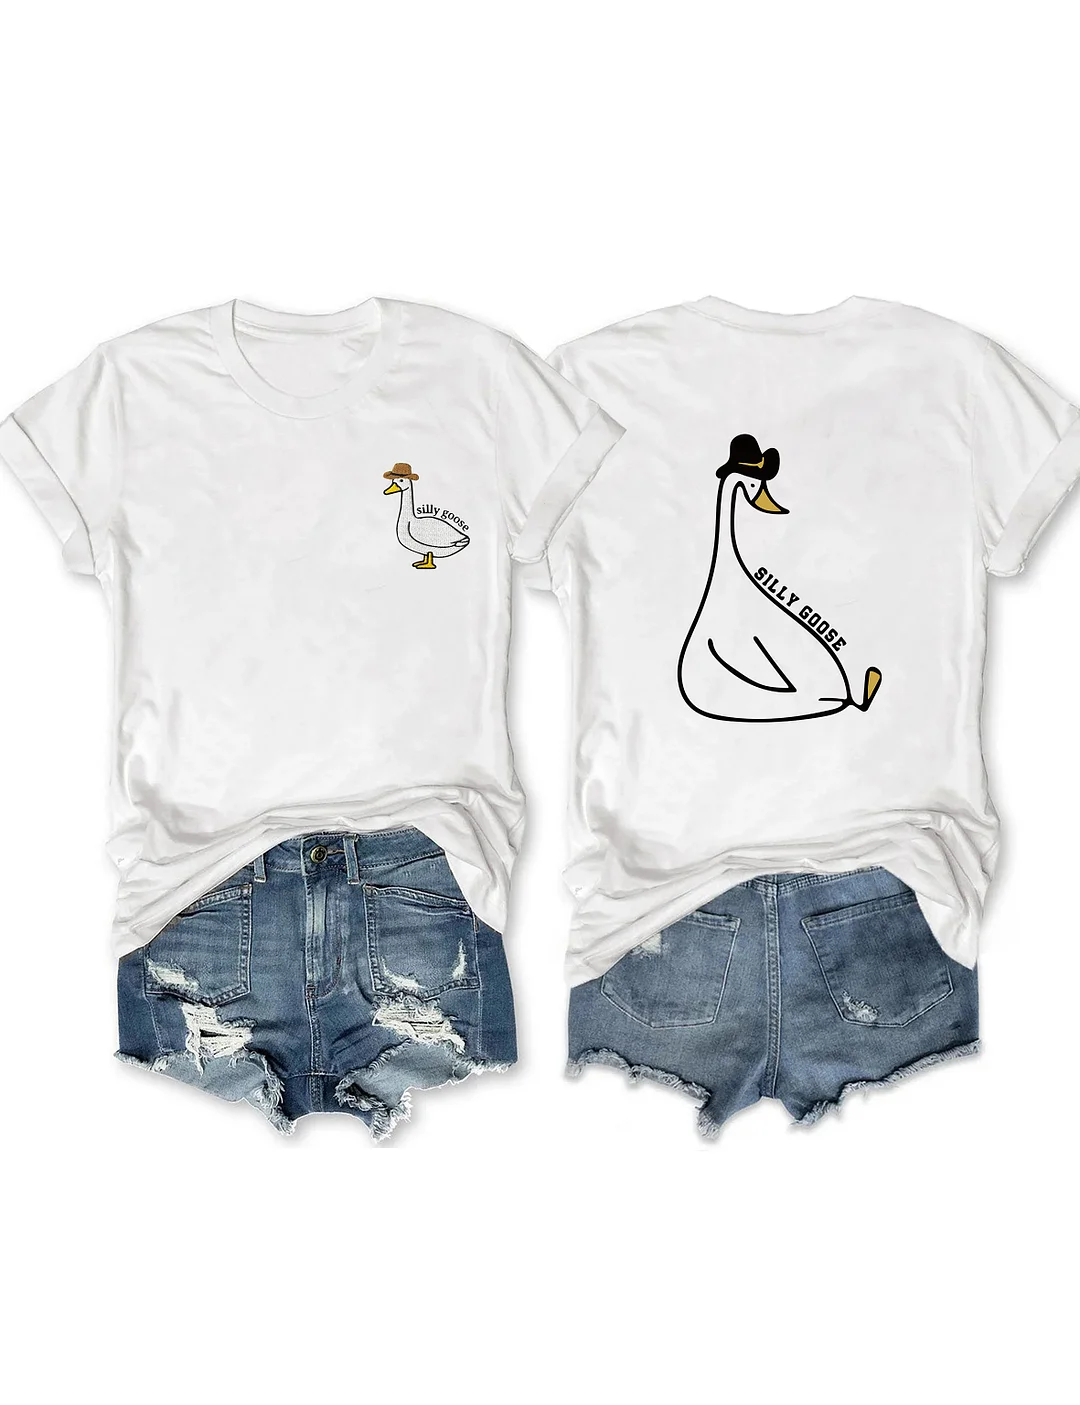 Silly Goose T-shirt